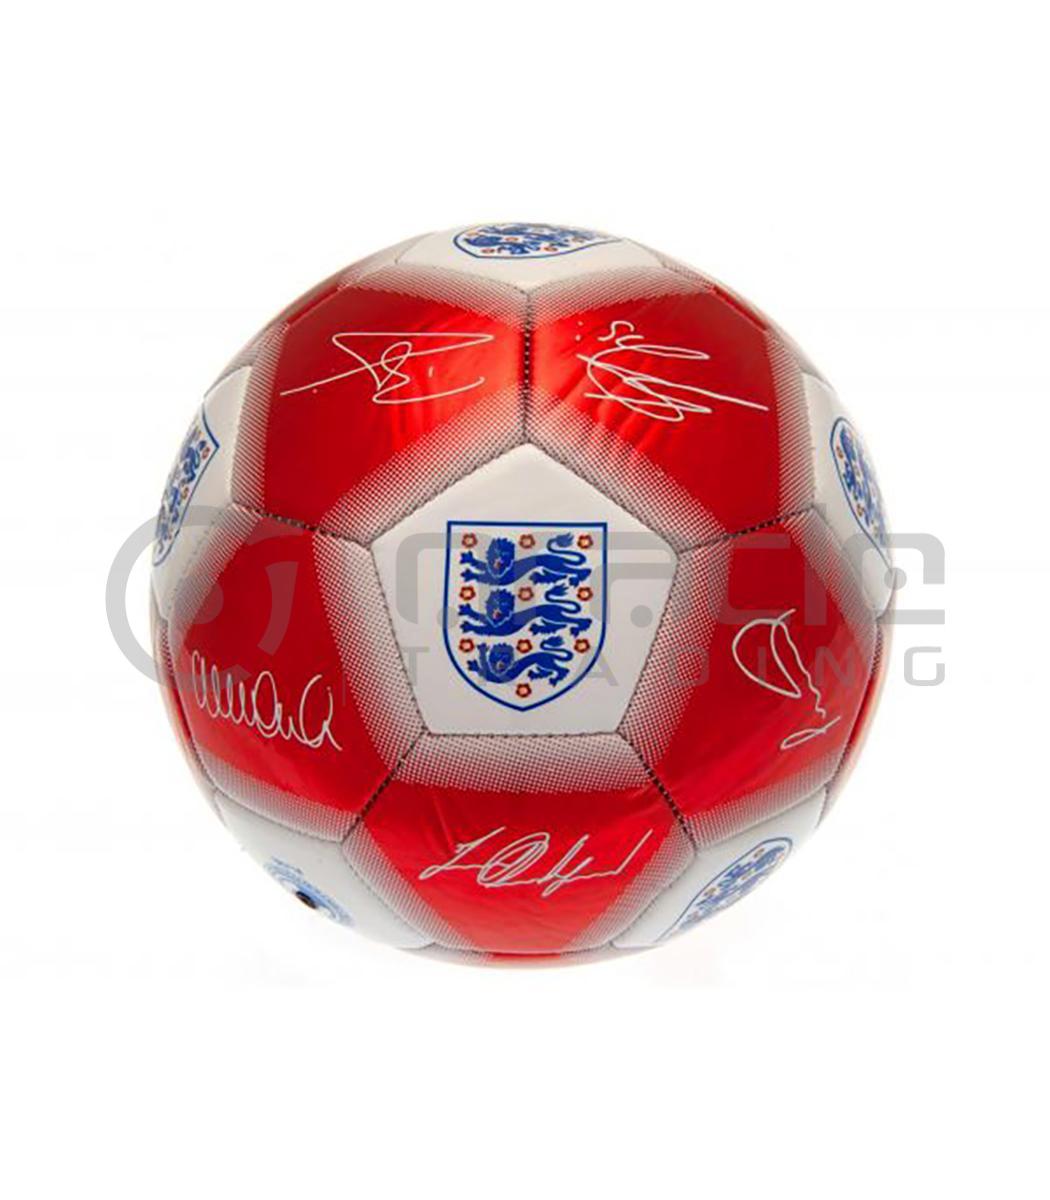 large soccer ball england signature red sfb005 c